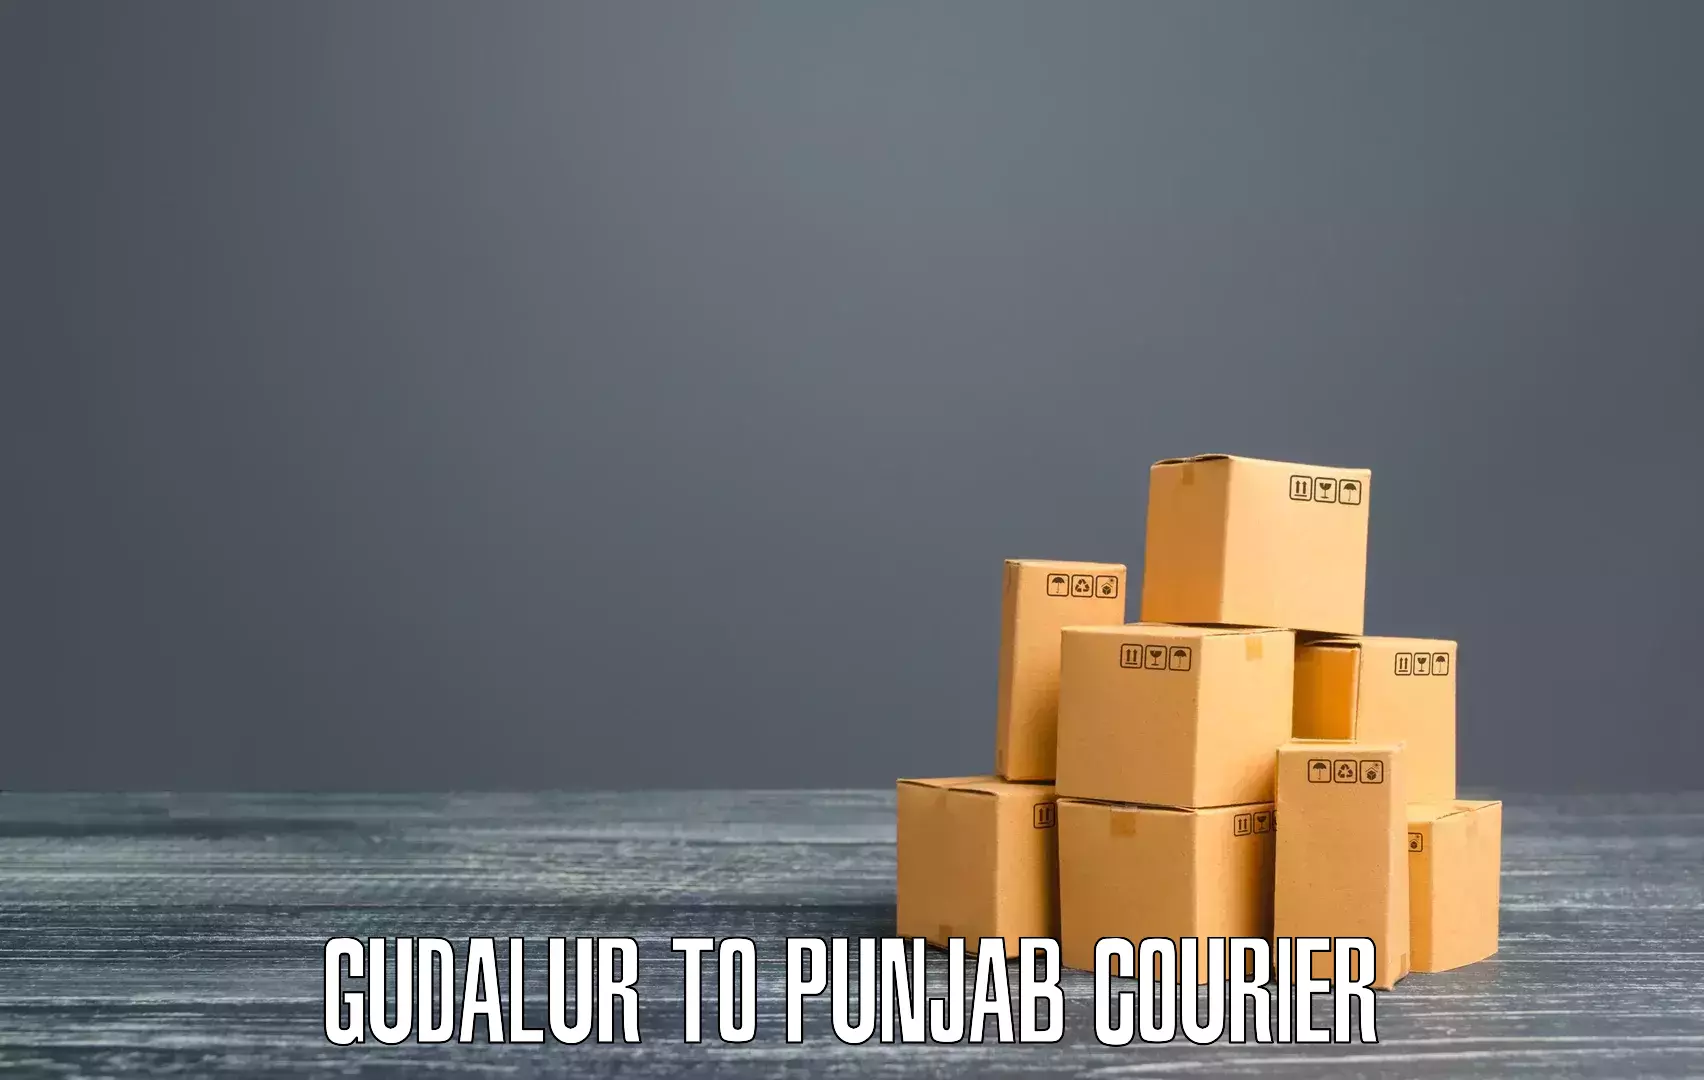 24/7 courier service in Gudalur to Malerkotla